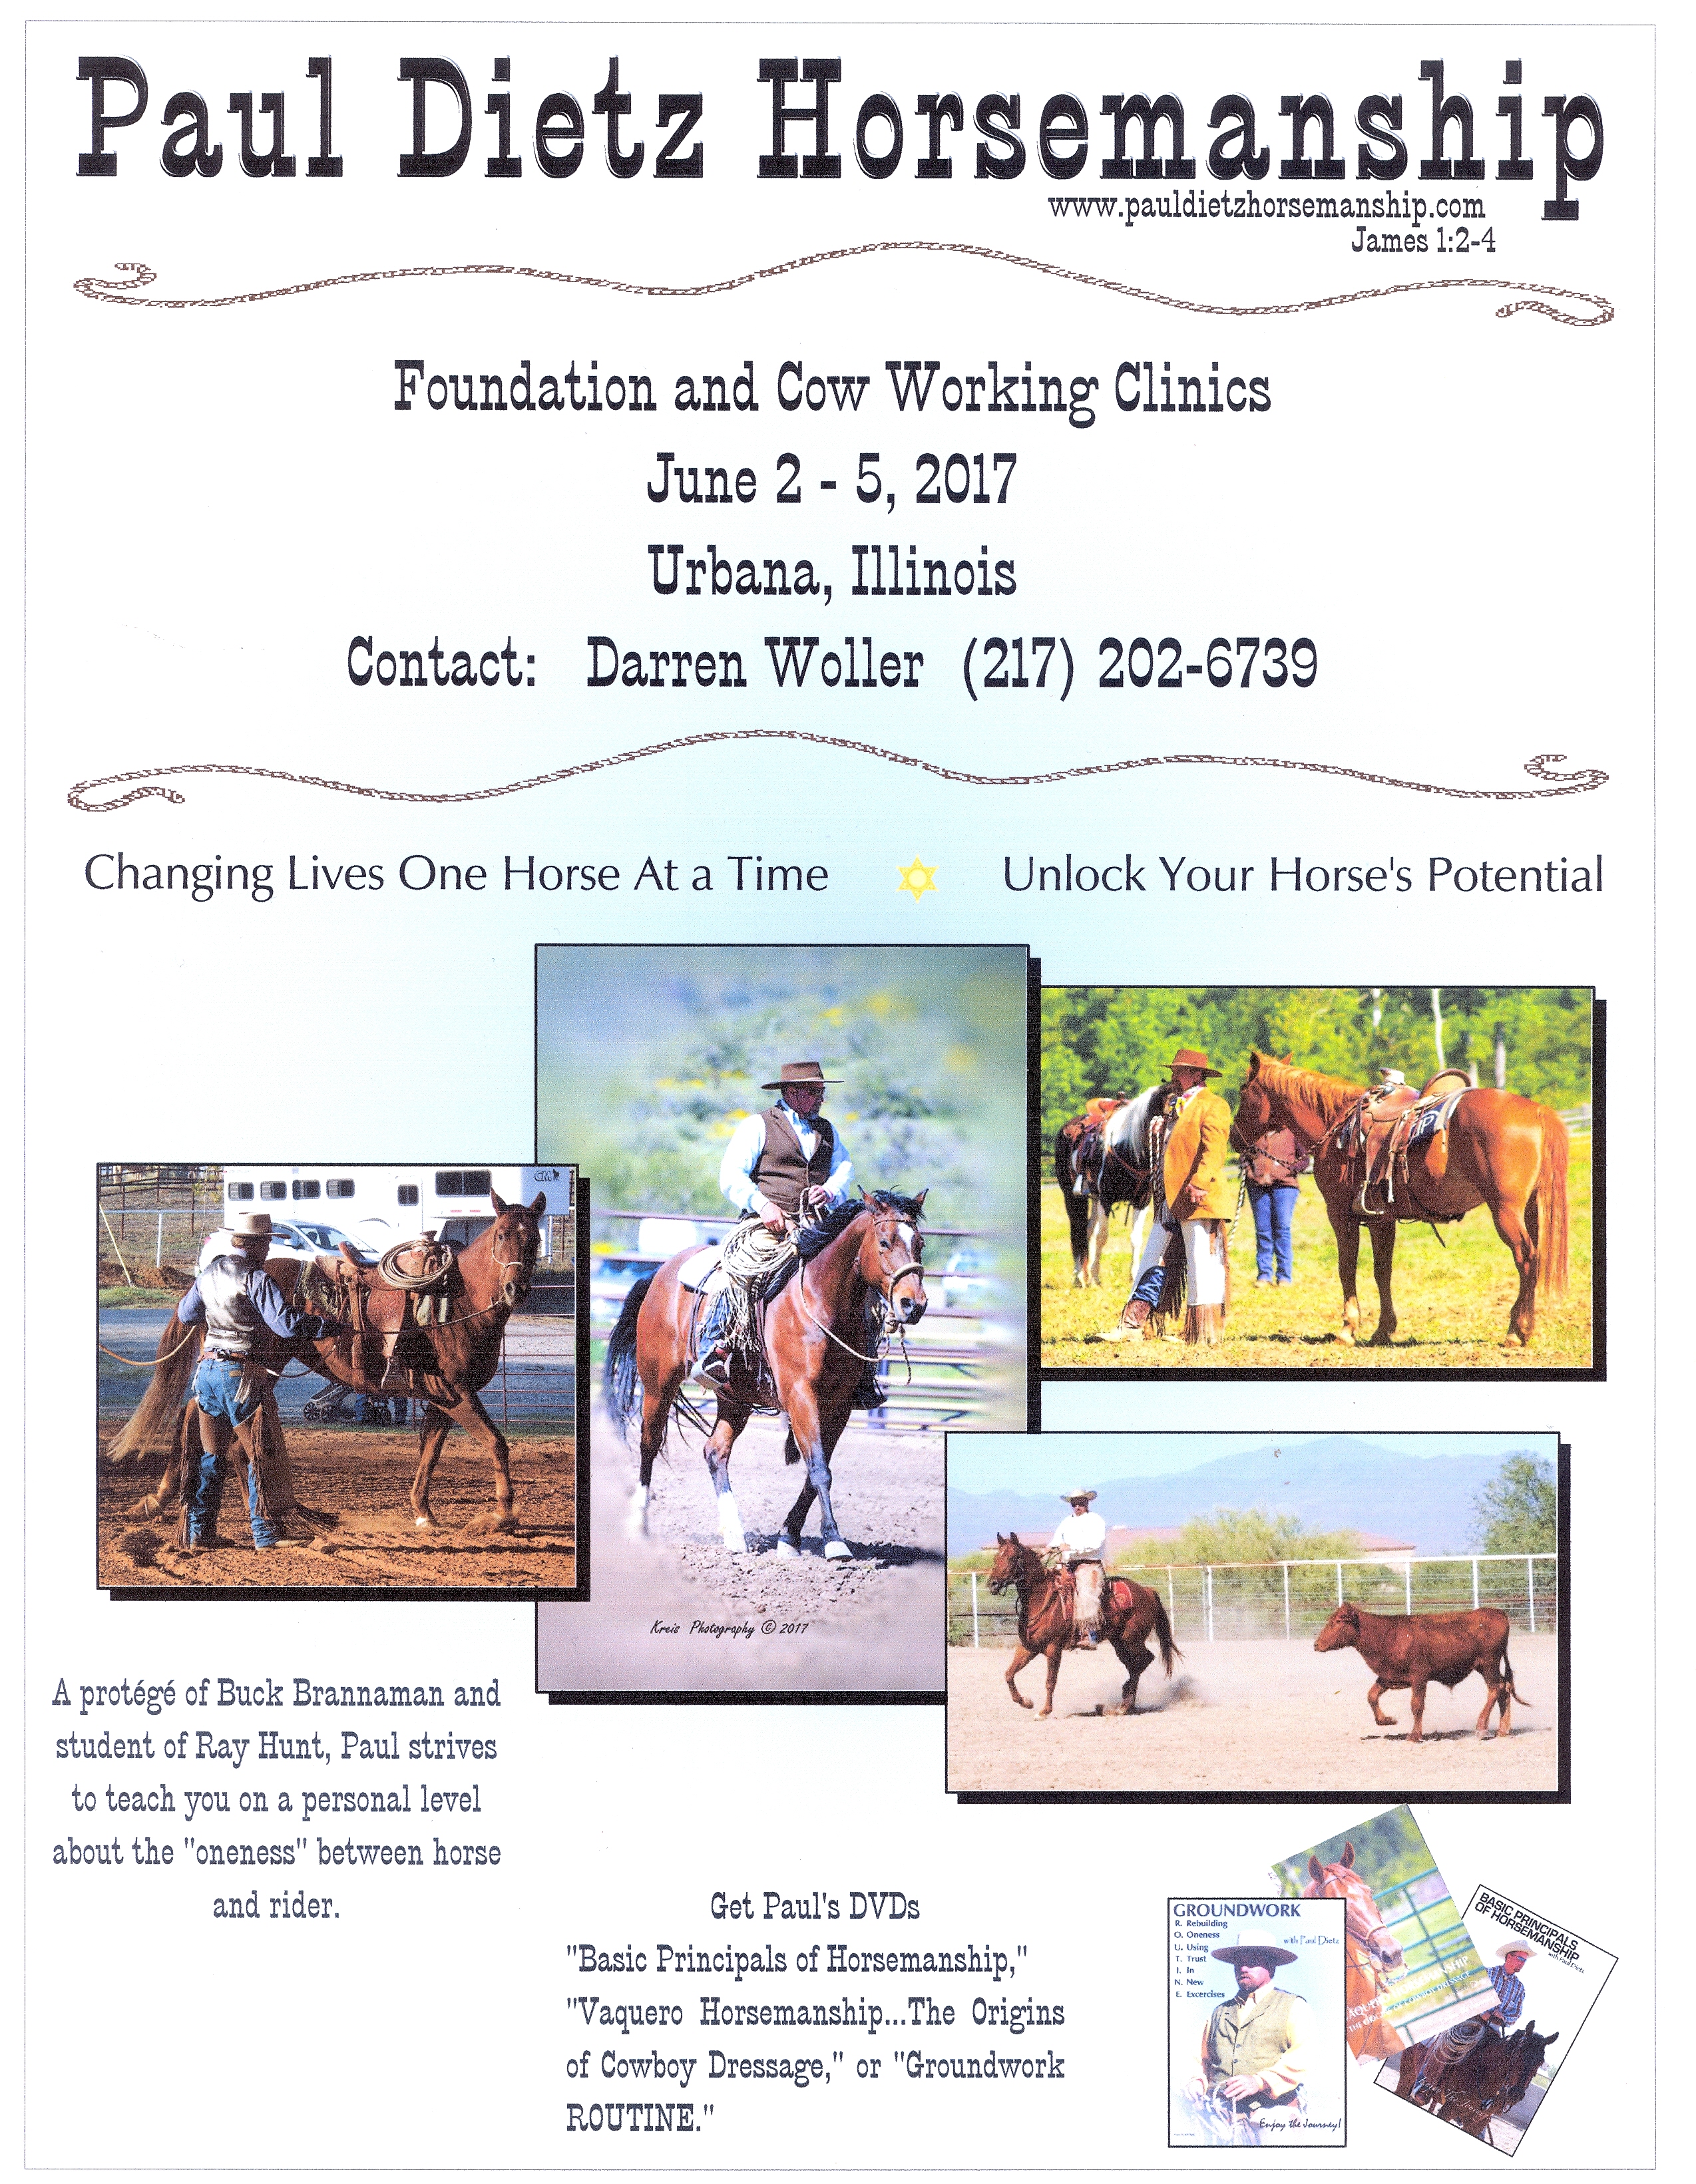 Paul Dietz Foundations and Cow Working Clinic